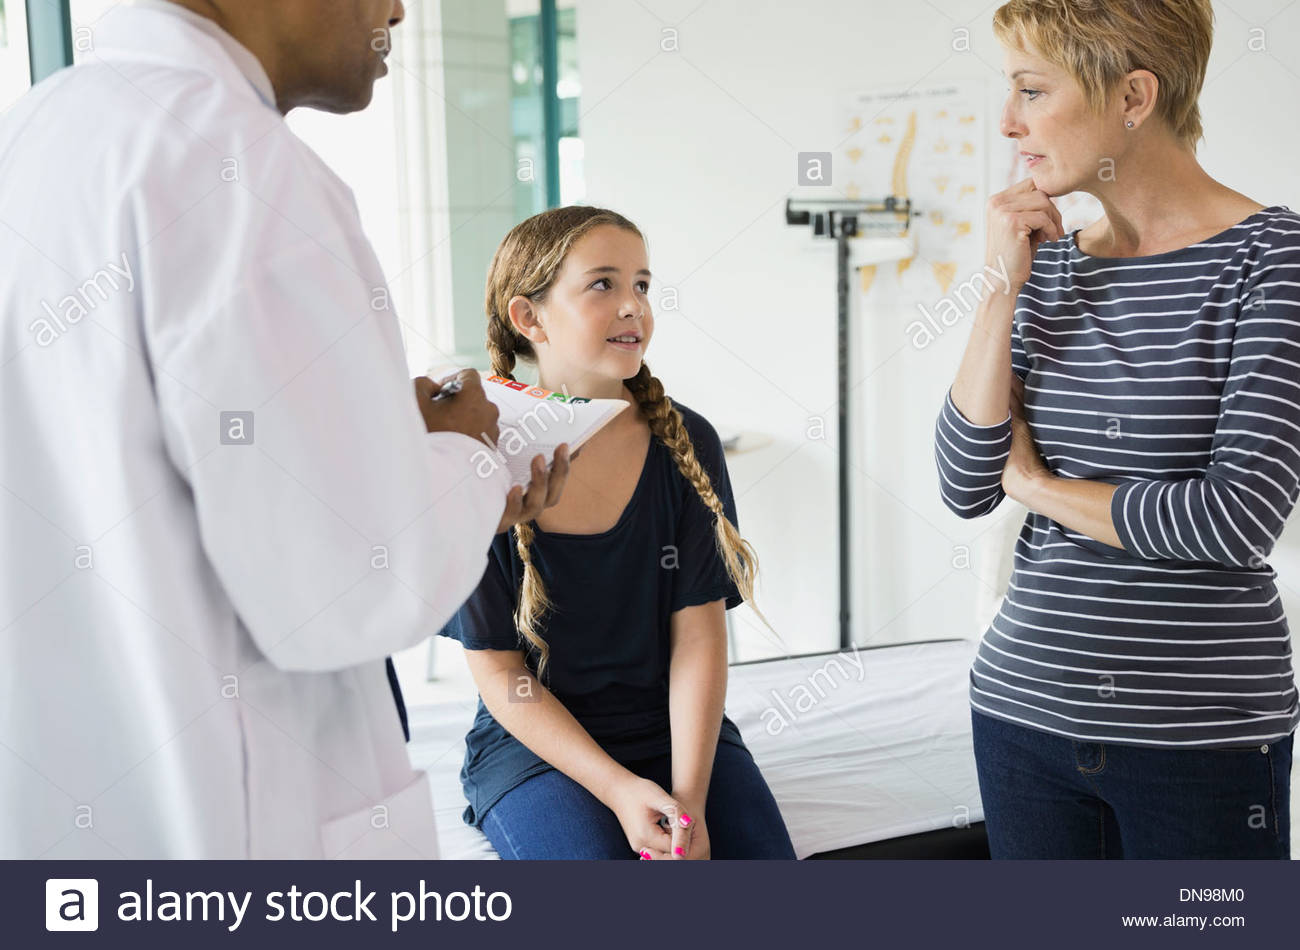 Mother and daughter visiting doctors office Stock Photo